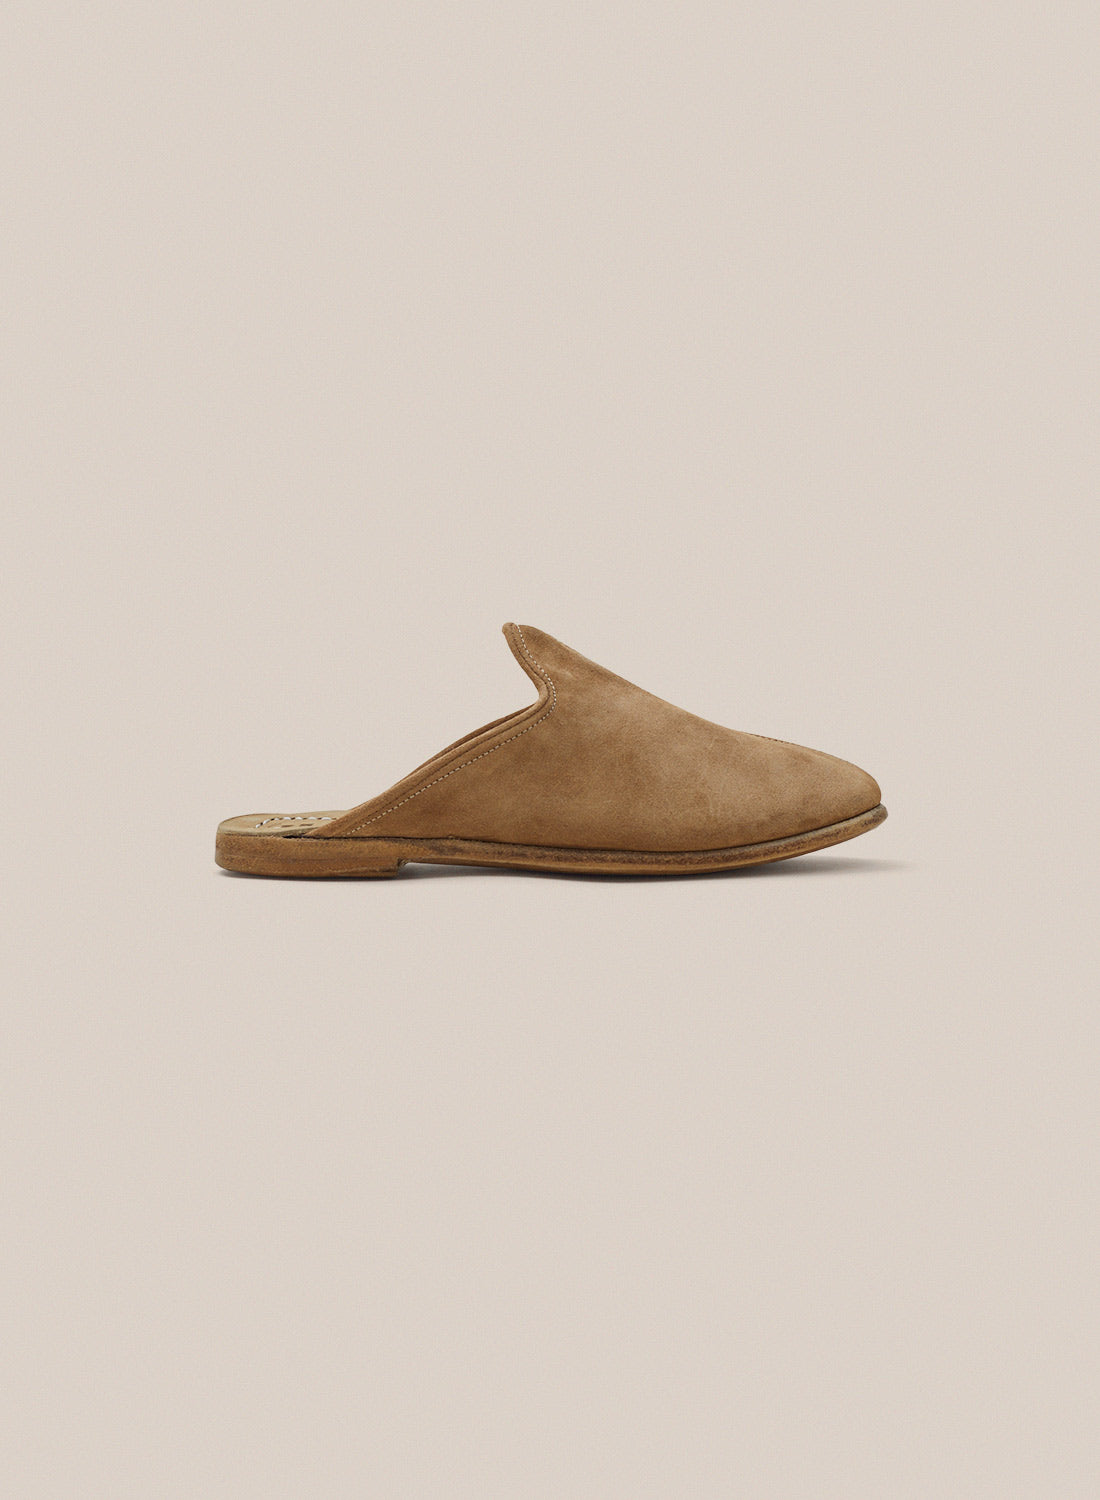 Macanao Brown Suede Baba (Womens)